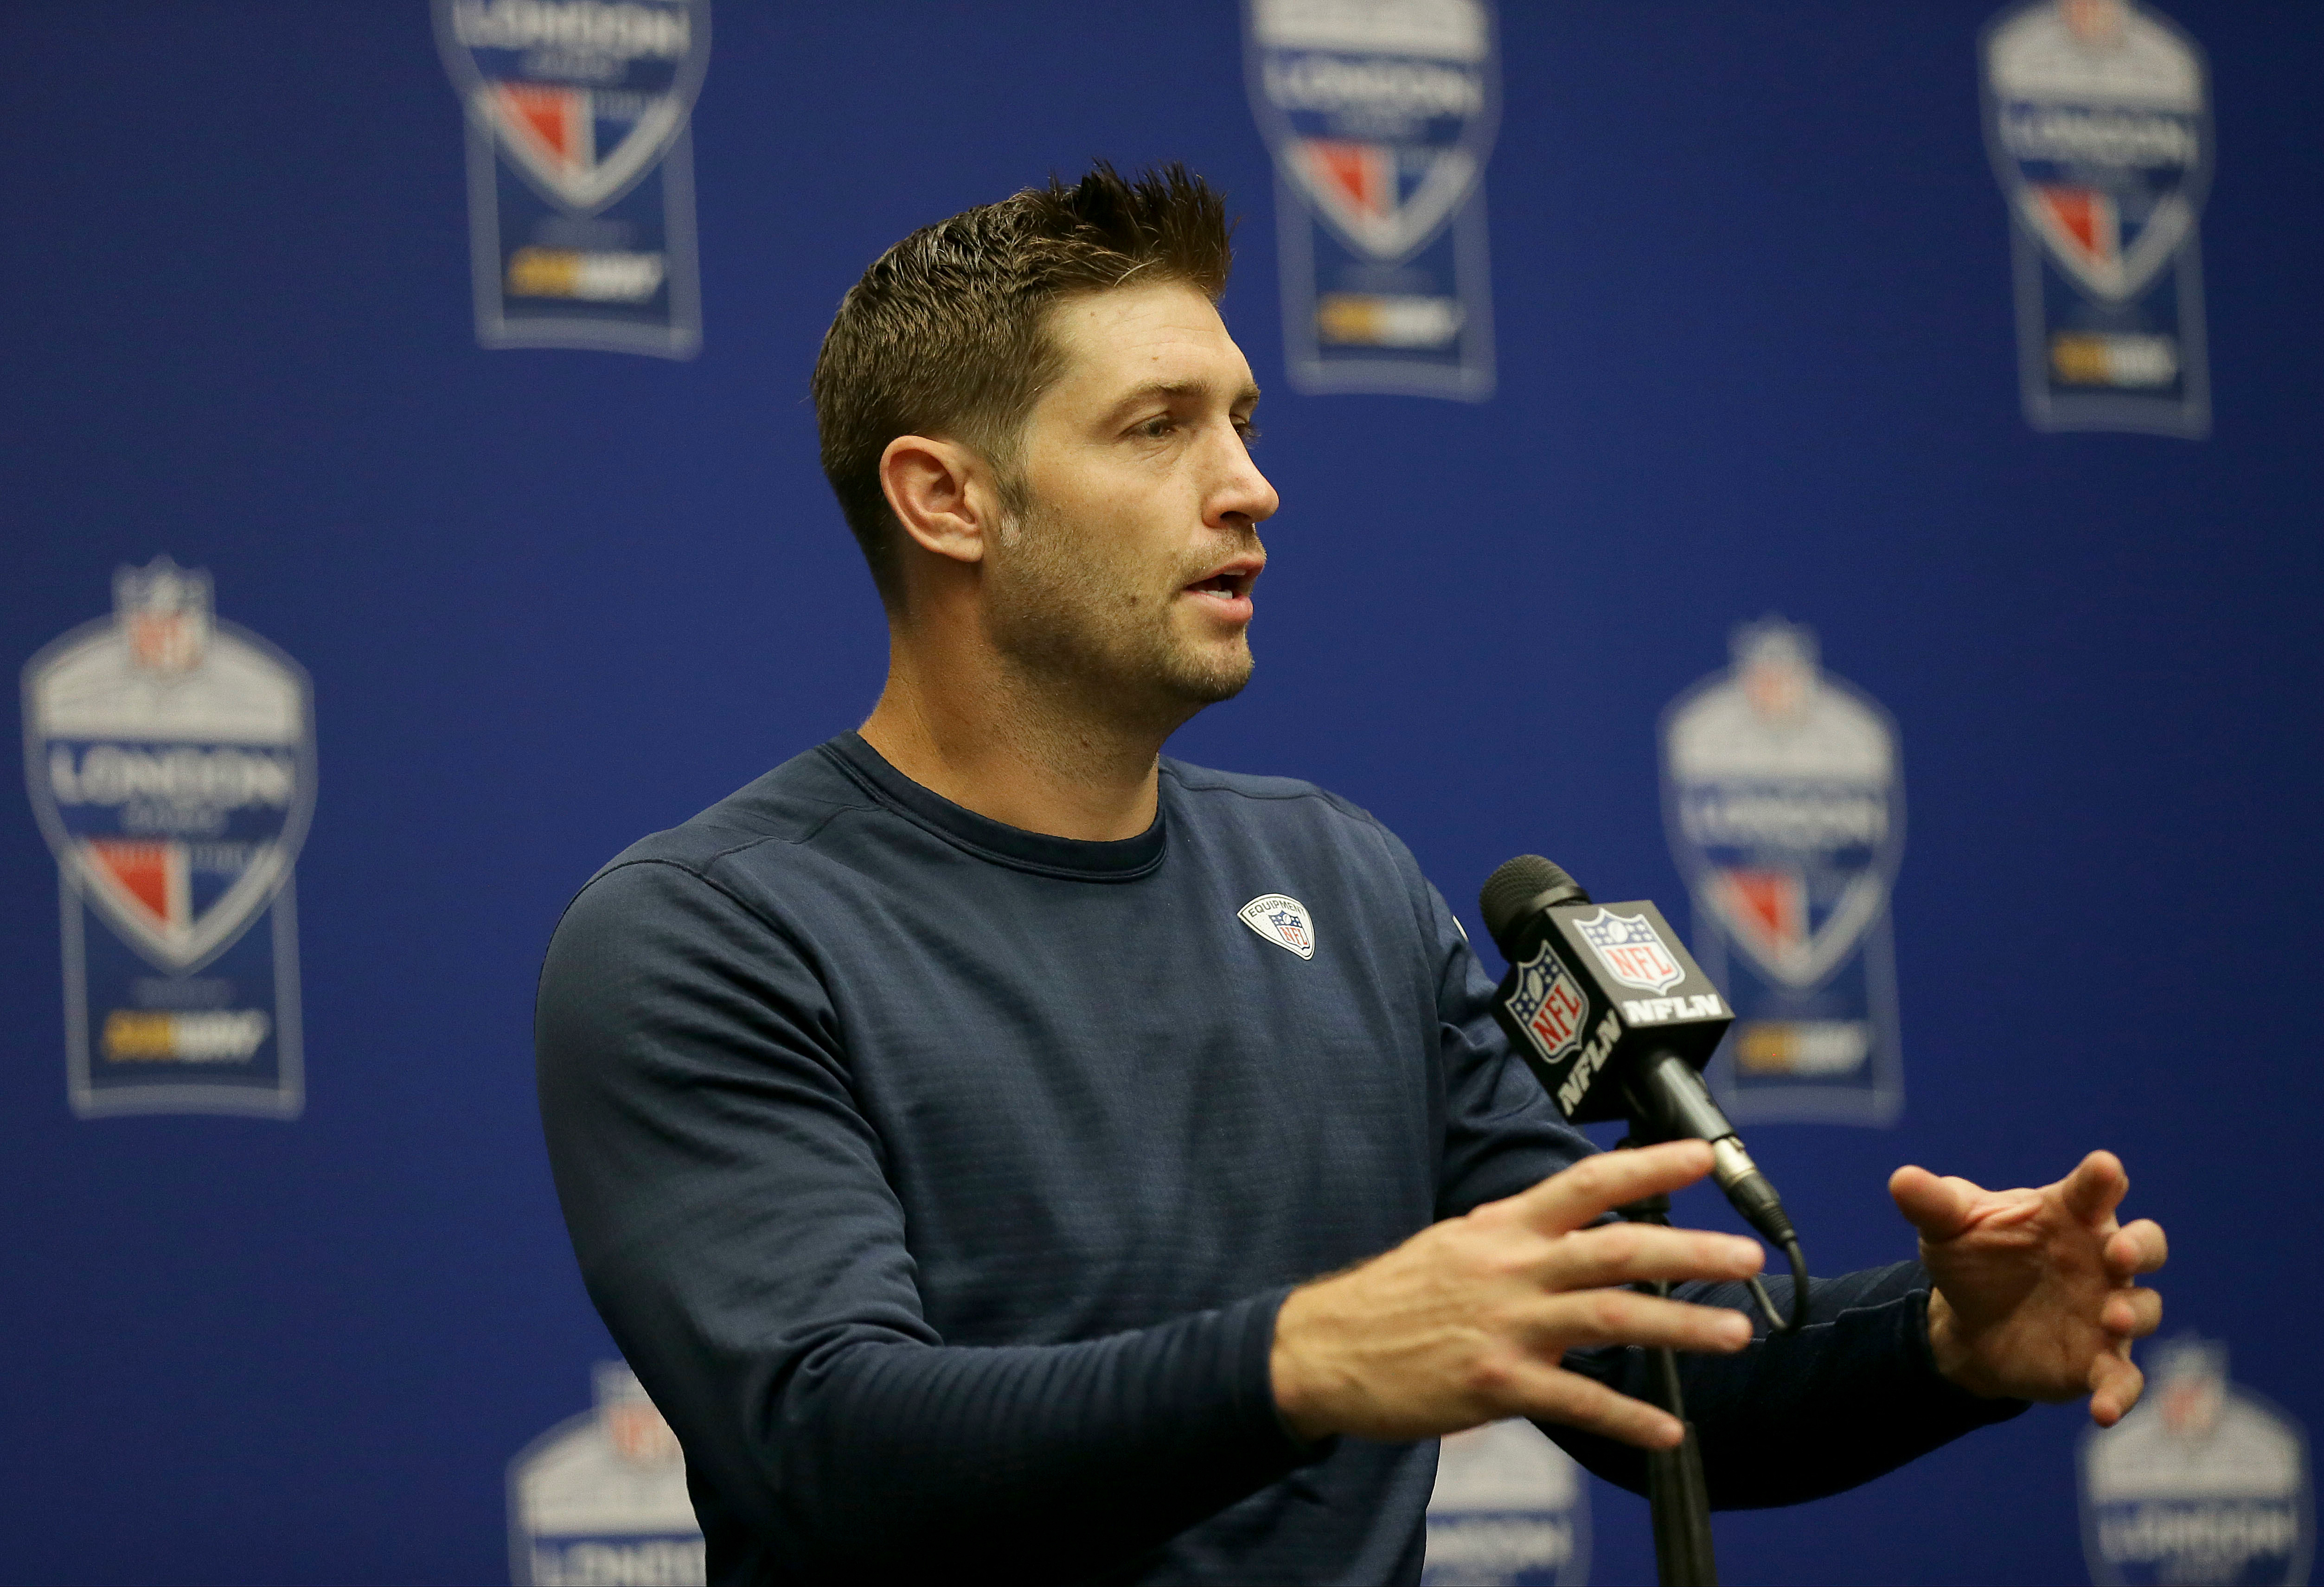 Jay Cutler 'Doesn't Recommend Divorce for Anybody' After Affair